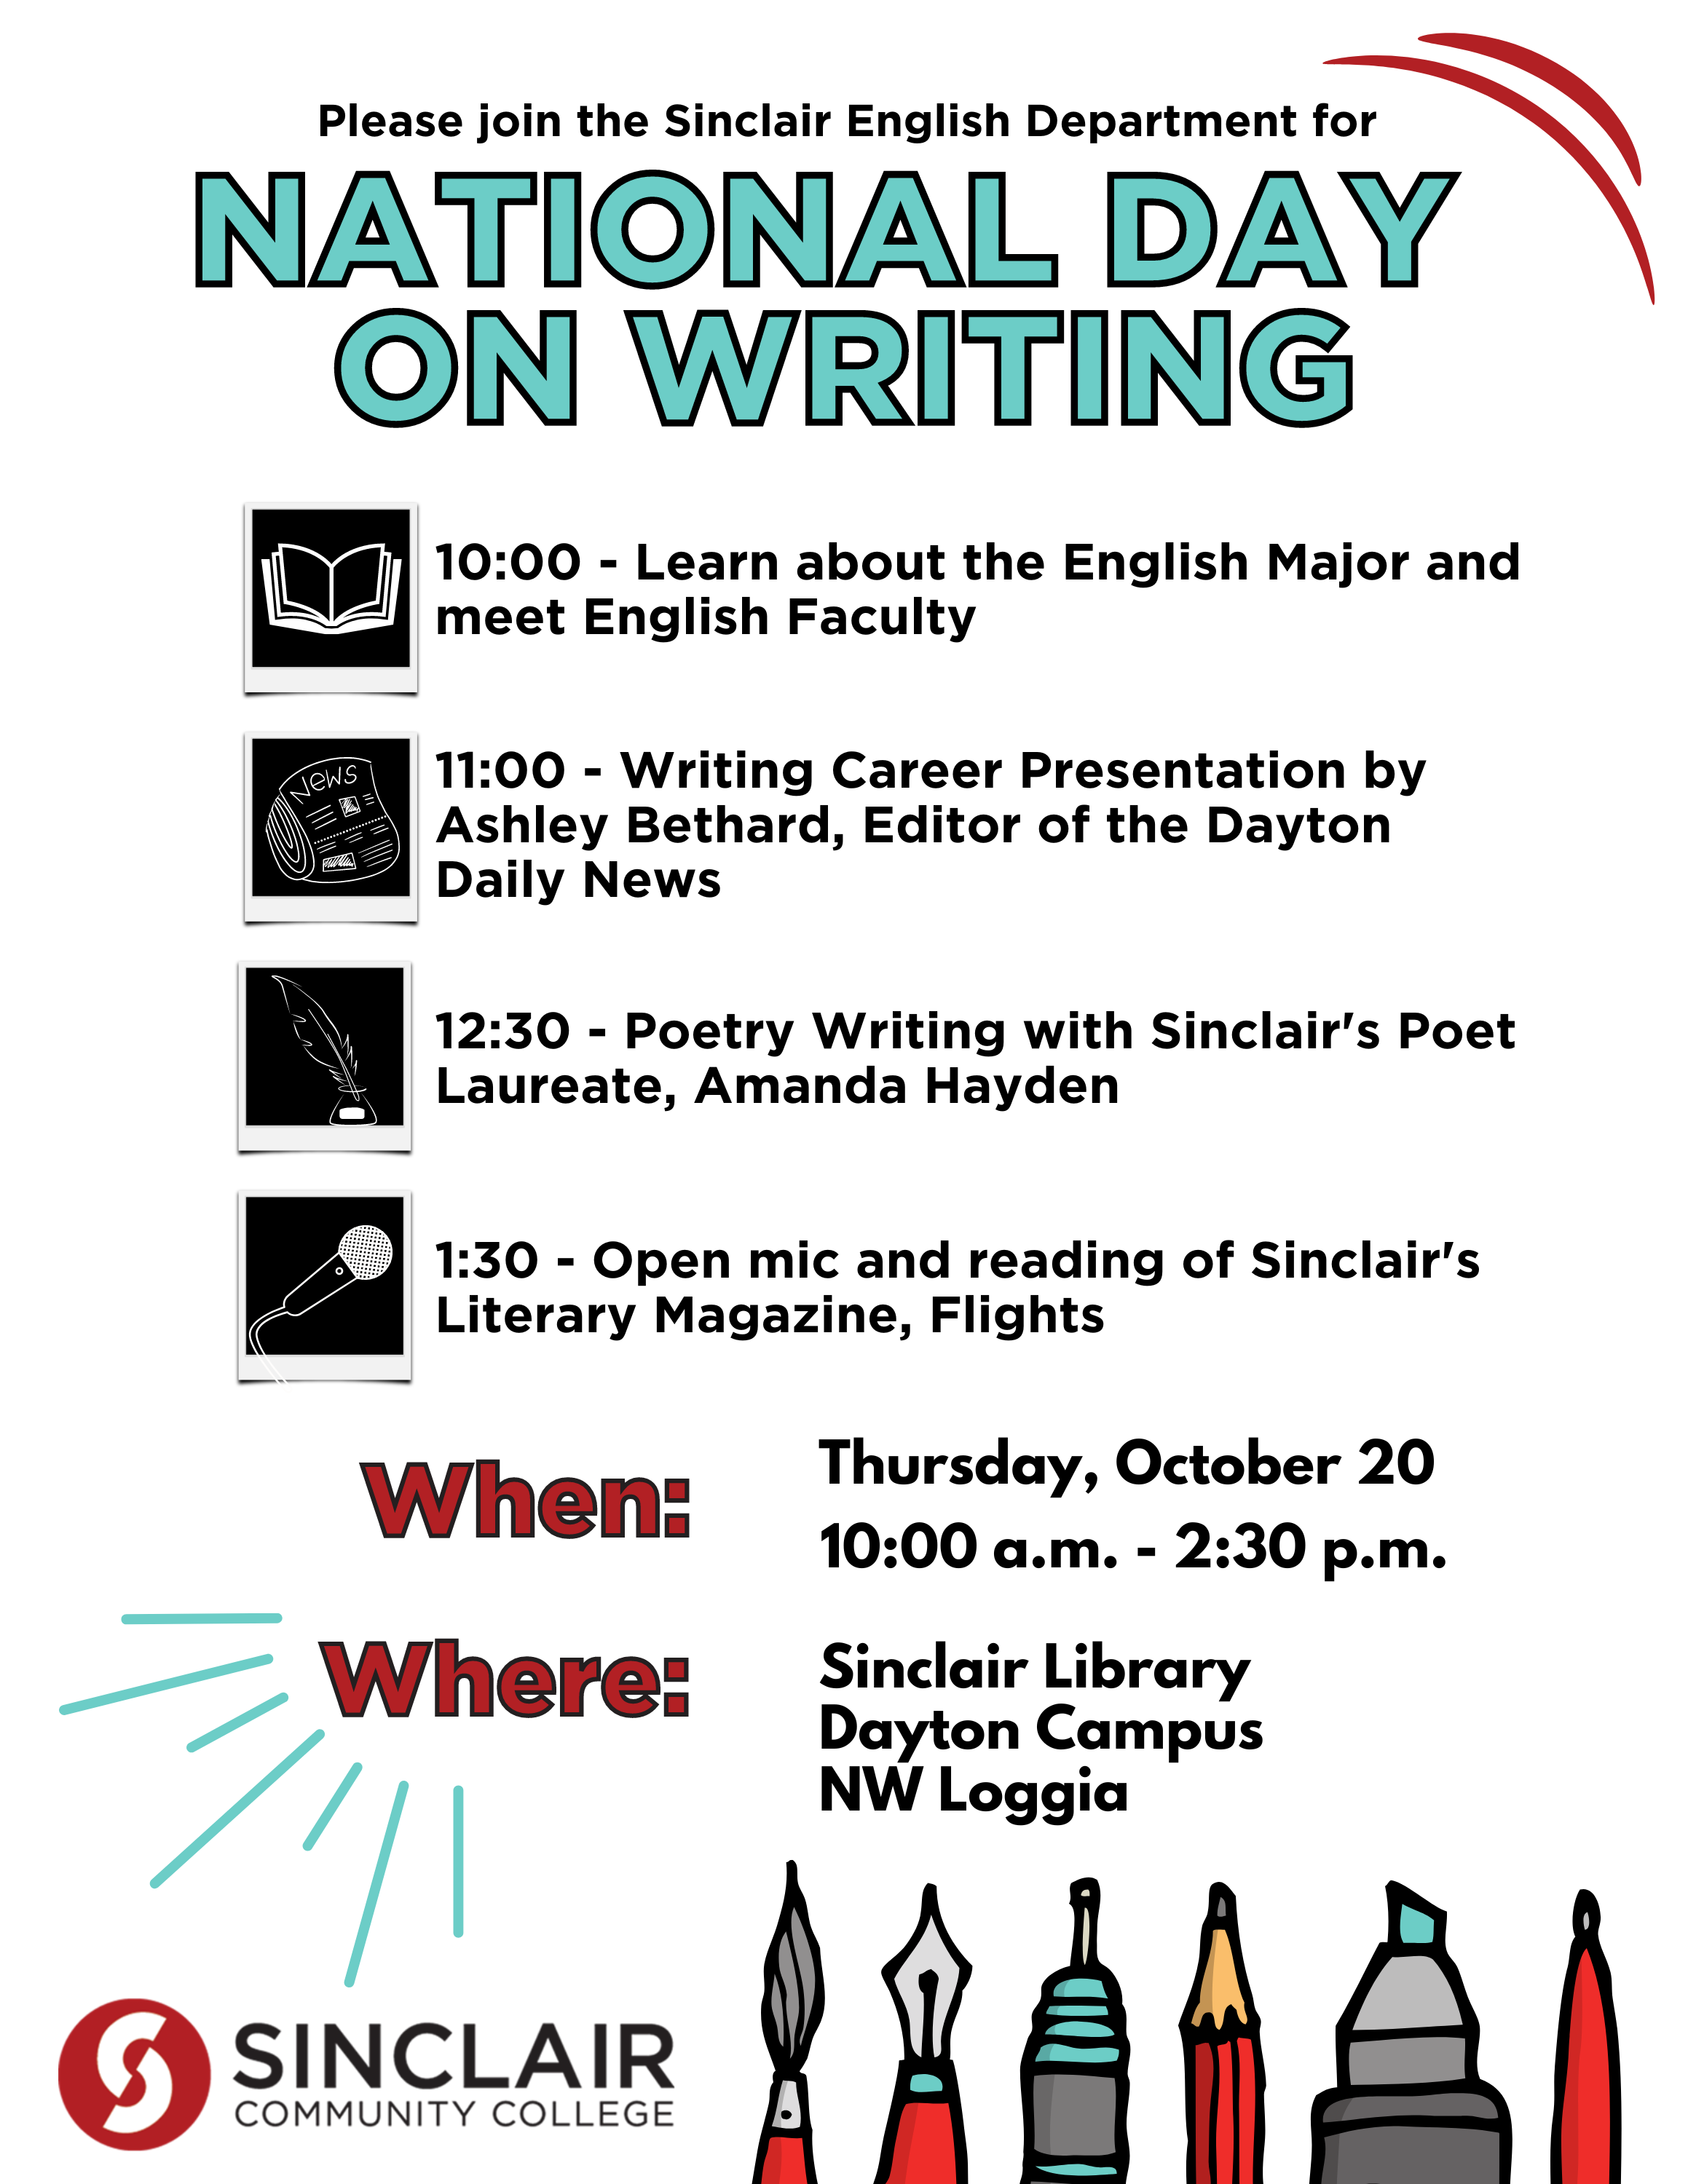 Please join the Sinclair English Department for National Day on Writing  10:00 - Learn about the English Major and meet English Faculty 11:00 - Writing Career Presentation by Ashley Bethard, Editor of the Dayton Daily News  12:30 - Poetry Writing with Sinclair’s Poet Laureate, Amanda Hayden  1:30 - Open mic and reading of Sinclair’s Literary Magazine, Flights  When: Thursday, October 20, 10:00 a.m. - 2:30 p.m.  Where: Sinclair Library Dayton Campus NW Loggia.  Sinclair Logo